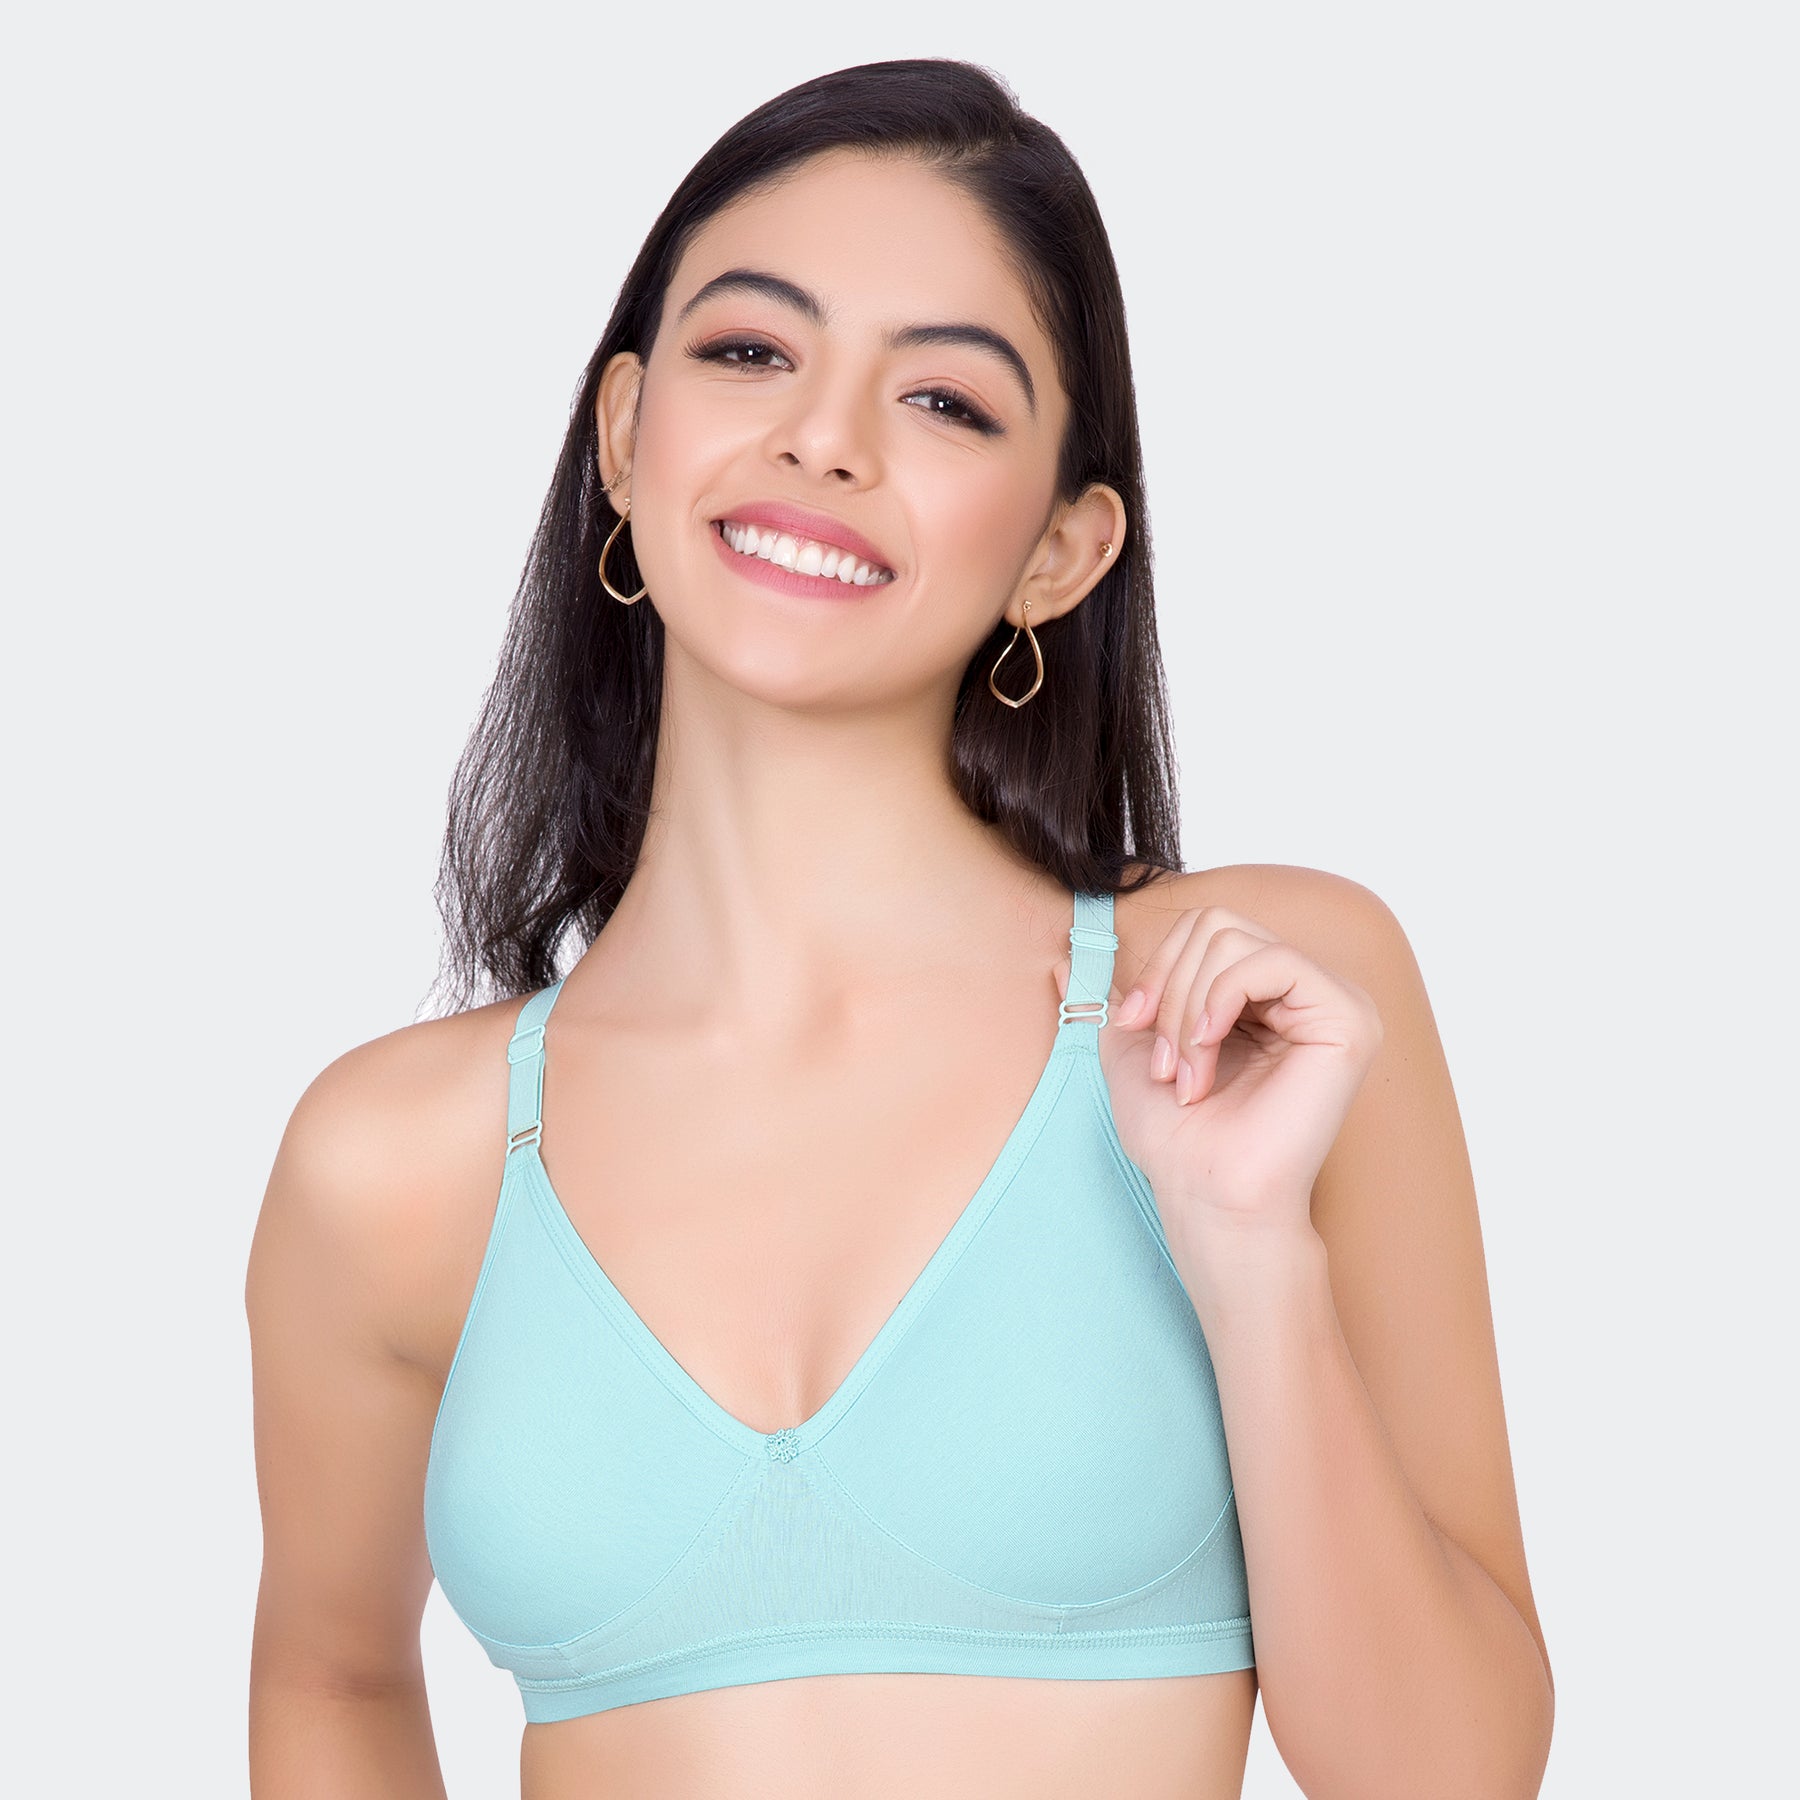 Prithvi Printed Bra (Color May Vary) - Pack of 3 –